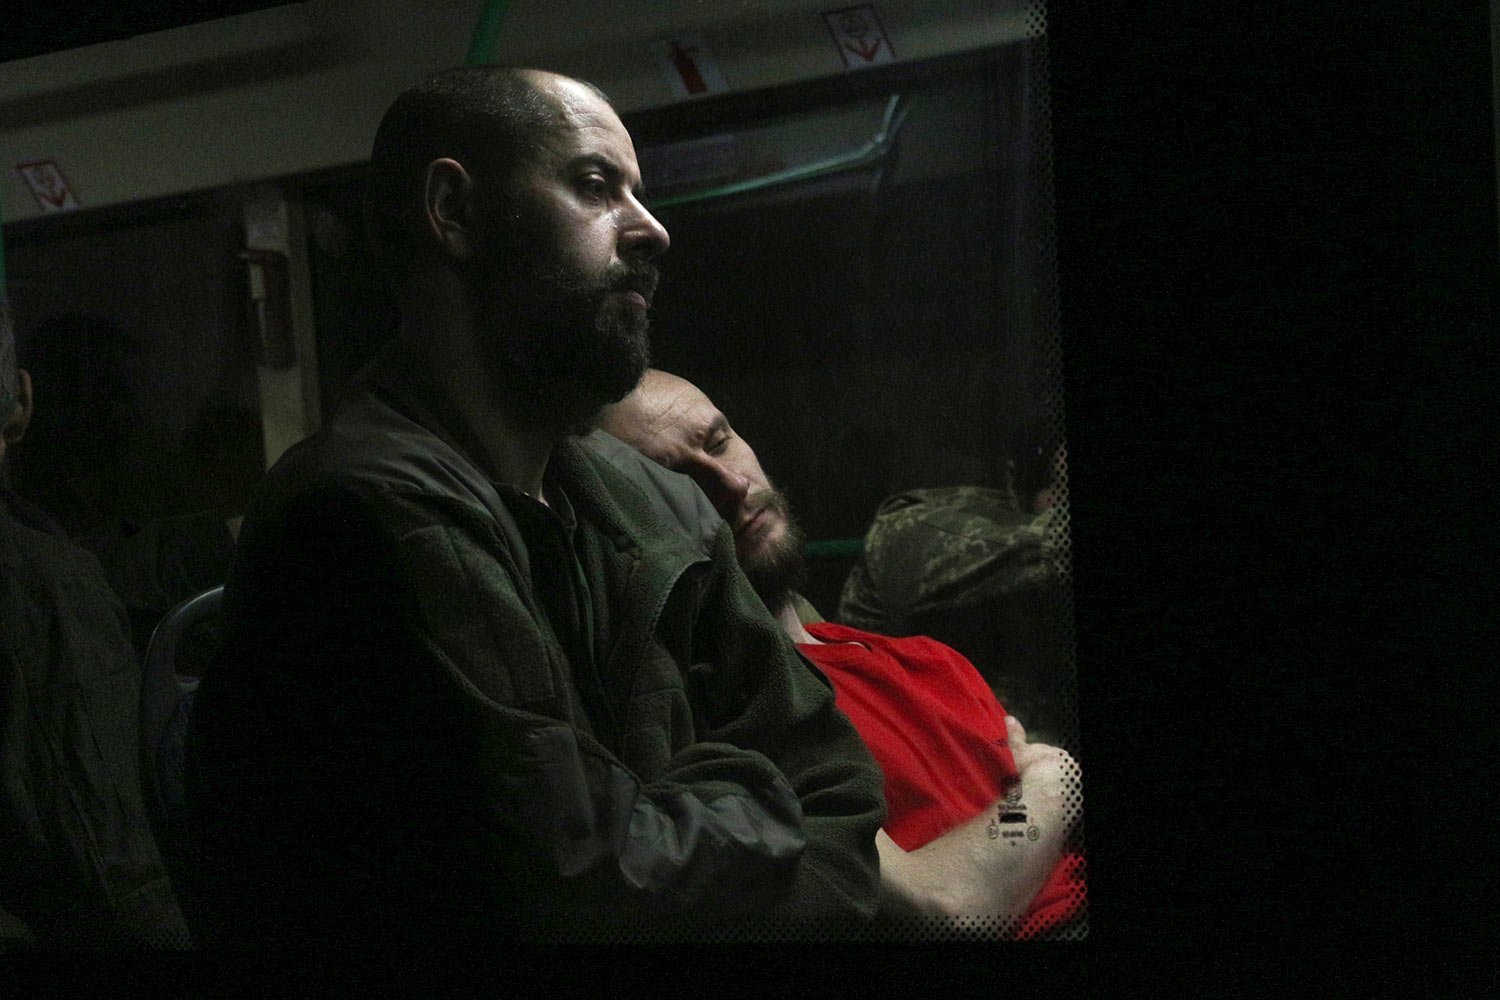  Ukrainian servicemen sit in a bus after they were evacuated from the besieged Mariupol's Azovstal steel plant, near a prison in Olyonivka, in territory under the government of the Donetsk People's Republic, eastern Ukraine, Tuesday, May 17, 2022. (A